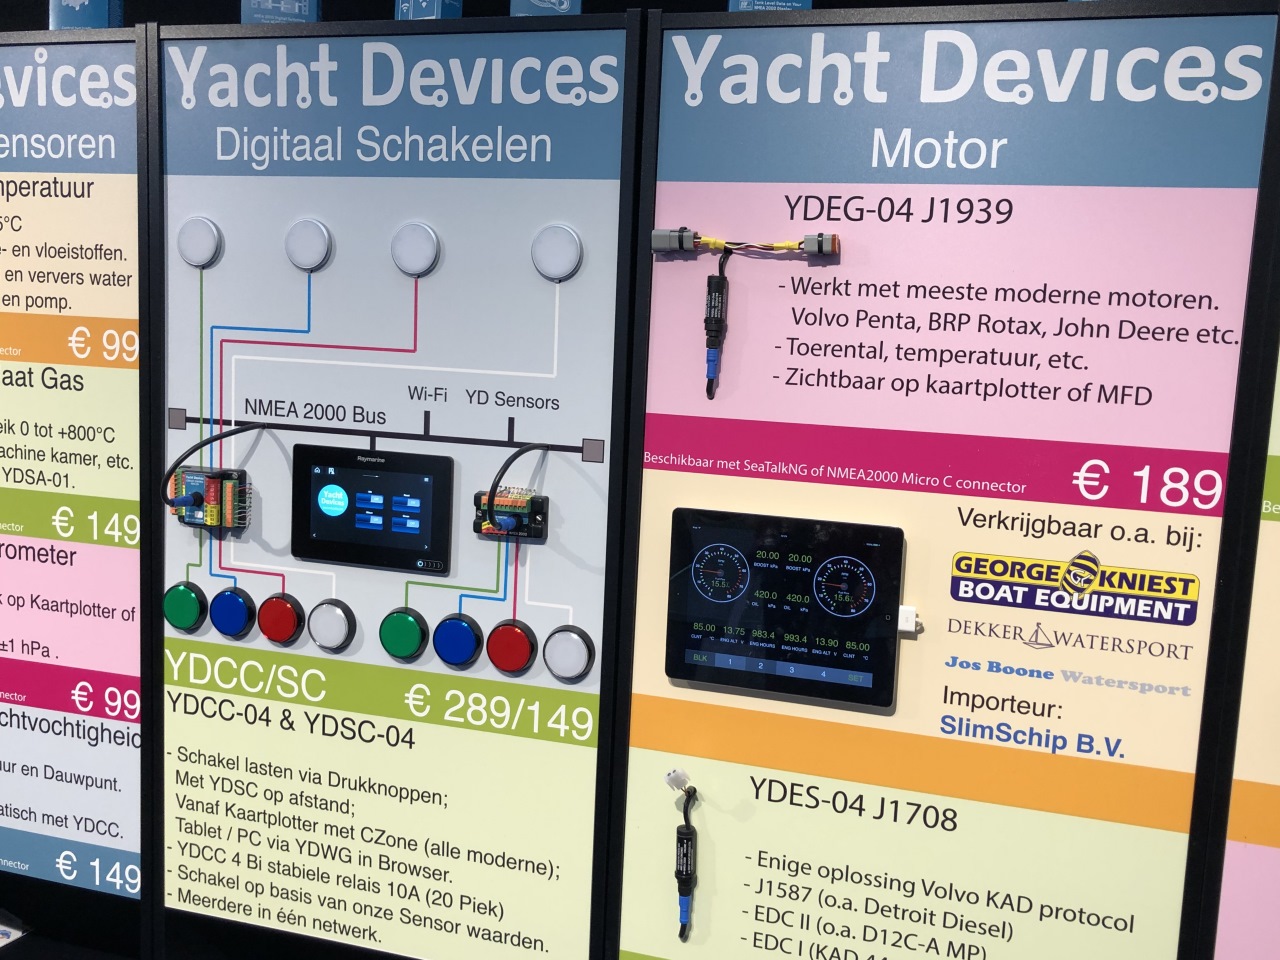 Demostration of Yacht Devices digital switching products